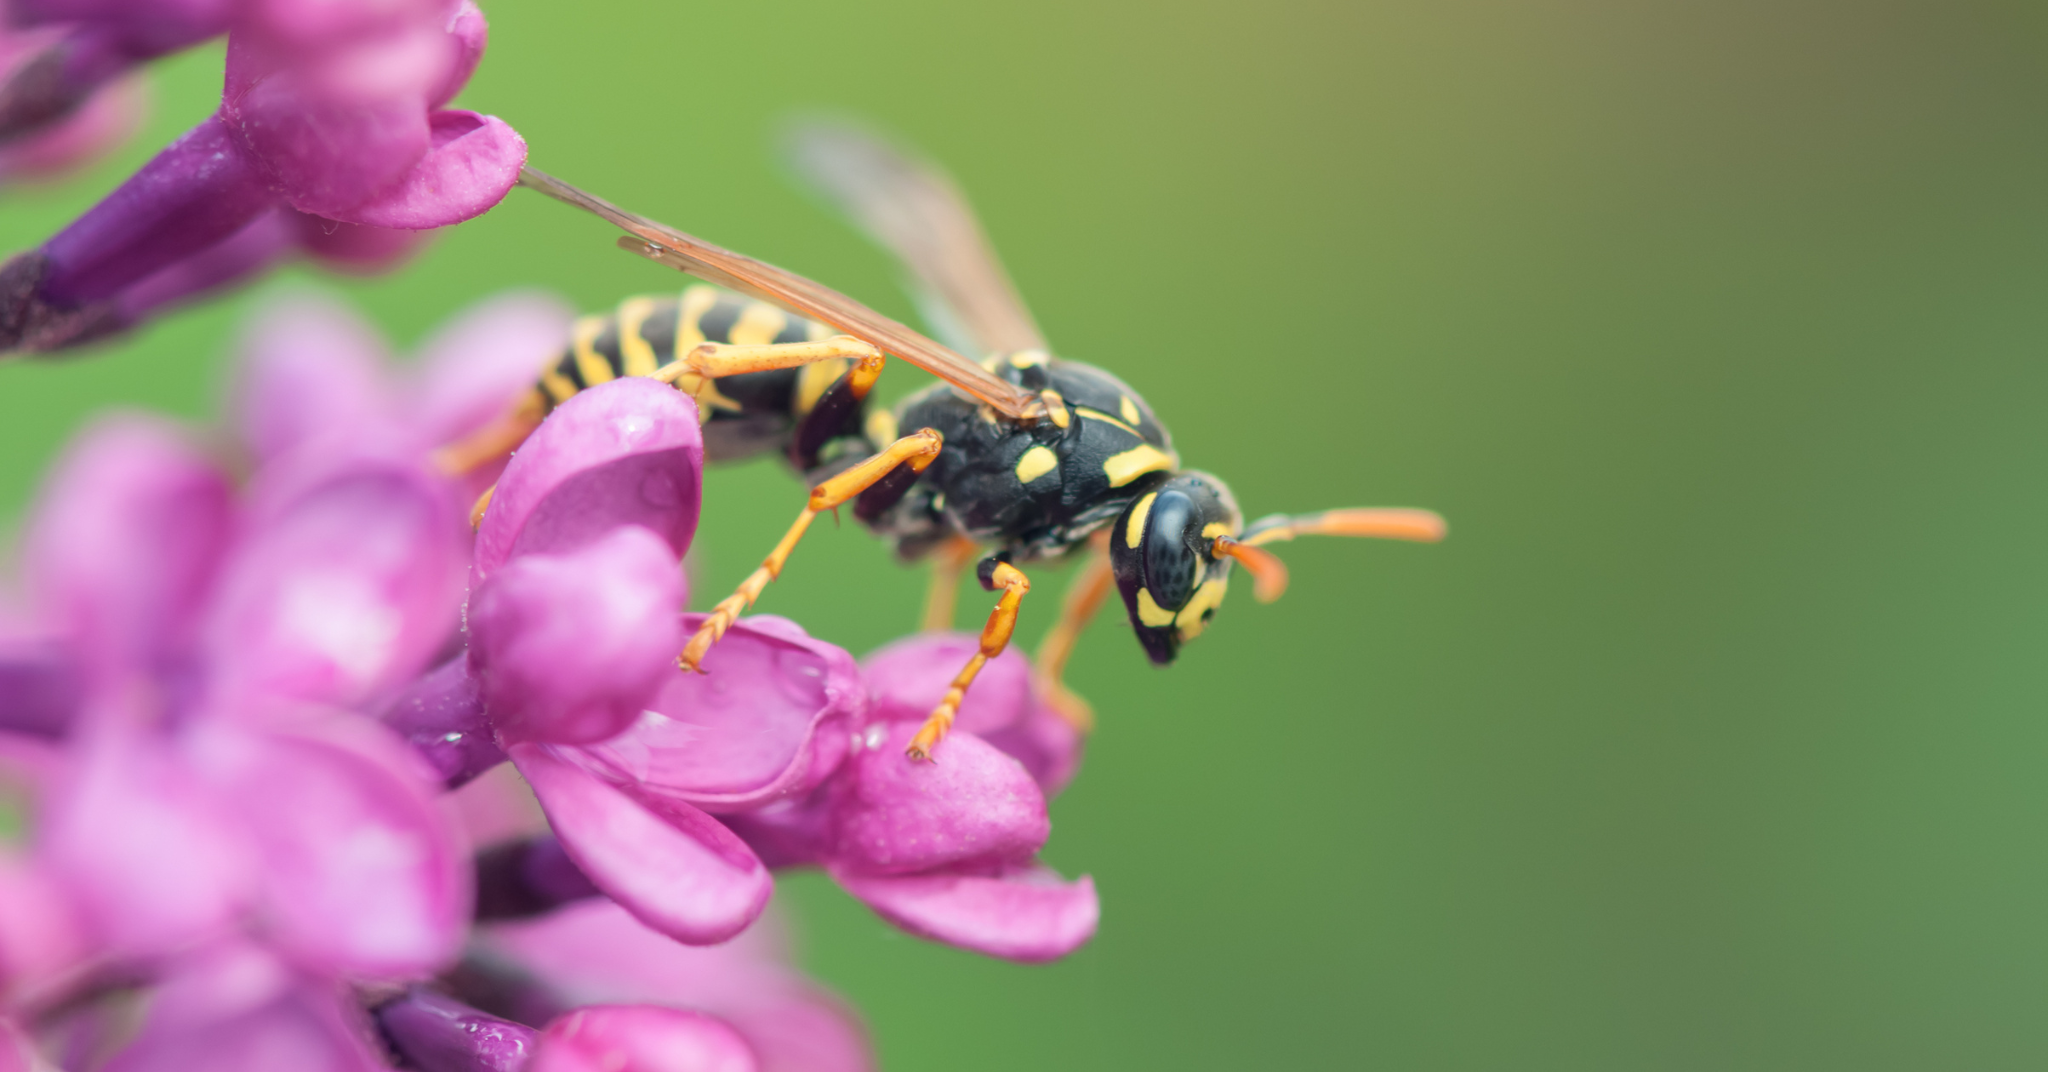 What Are Different Types of Wasps?